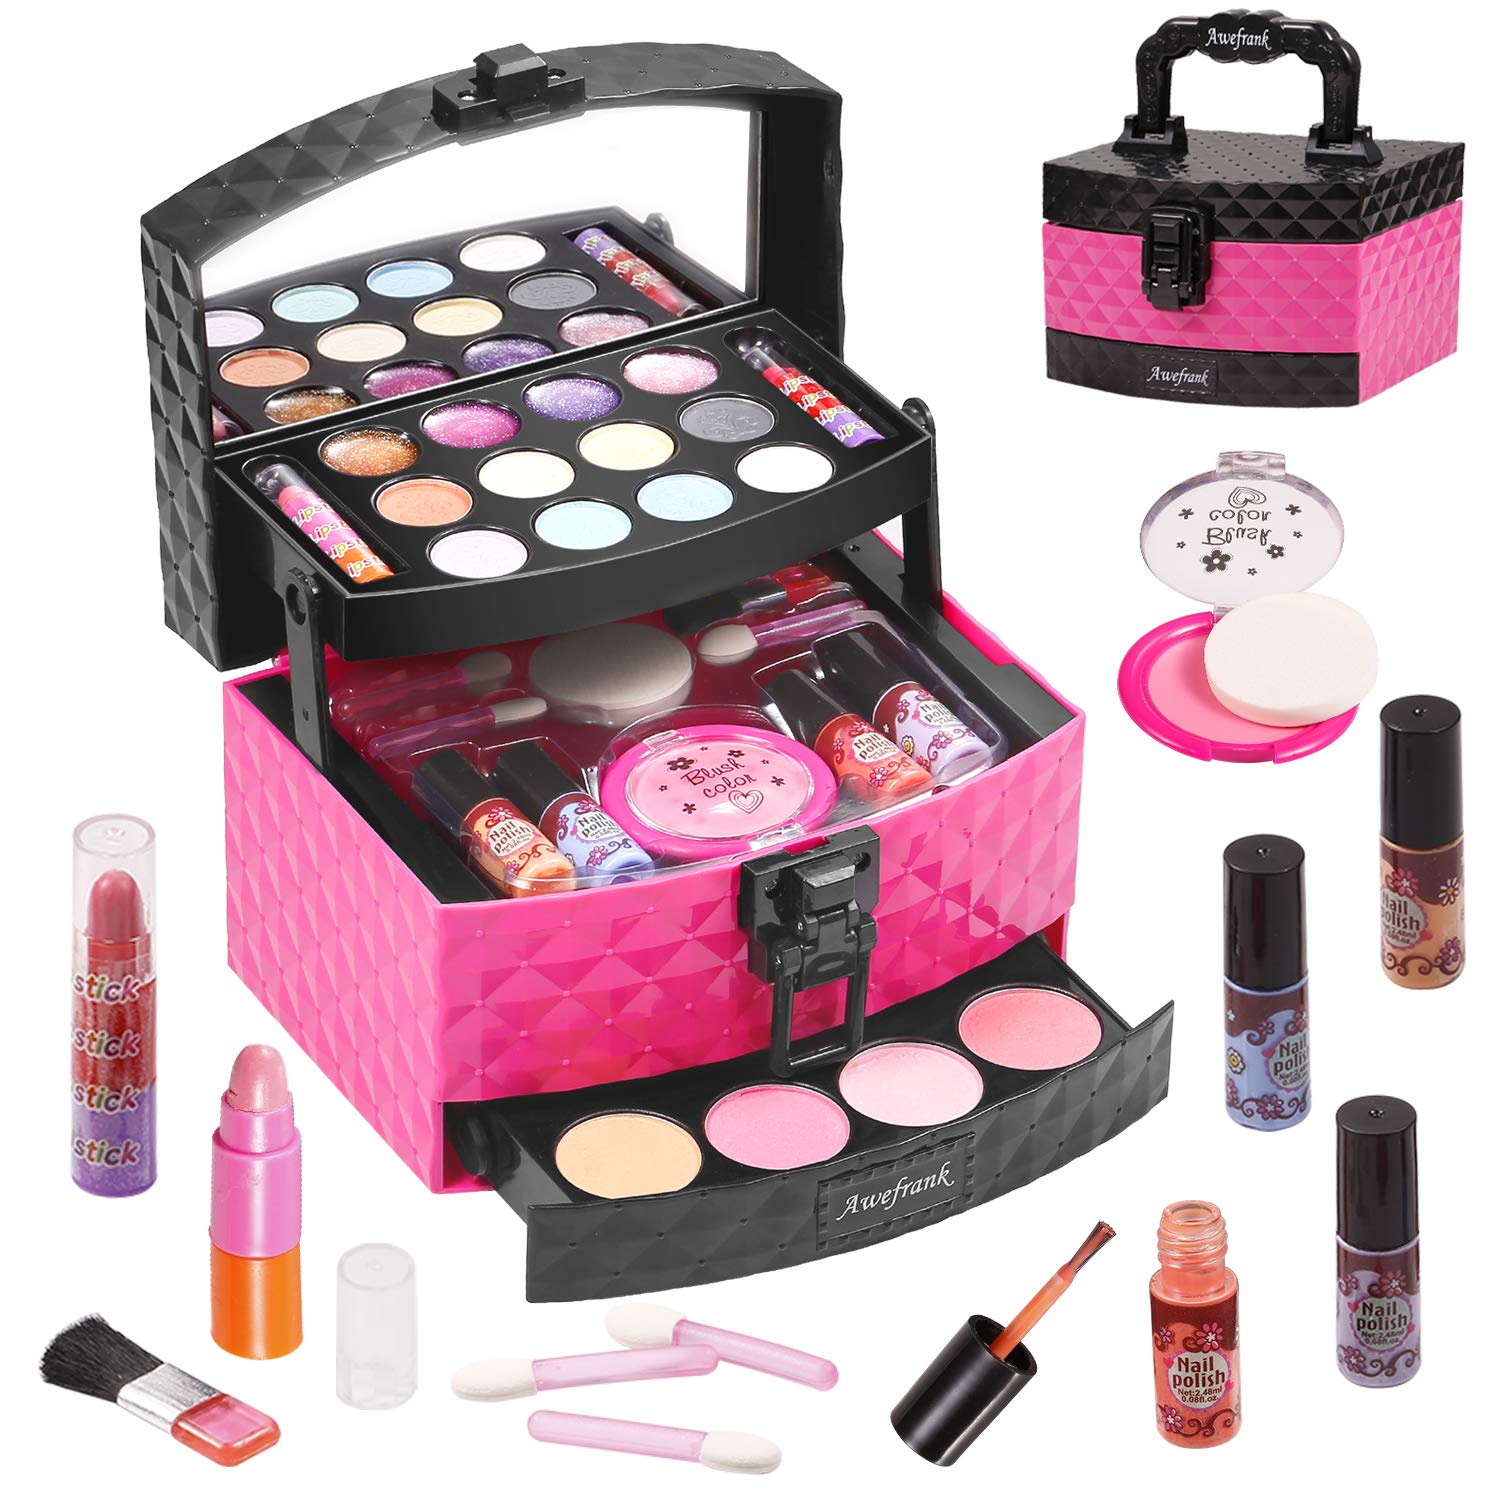 AWEFRANK 30 Pcs Kids Makeup Kit for Girl, Washable Girl Makeup Toy with Makeup Box, Non-Toxic Pretend Play Makeup Kit for Kids, Girl Real Cosmetic Toy Beauty Set